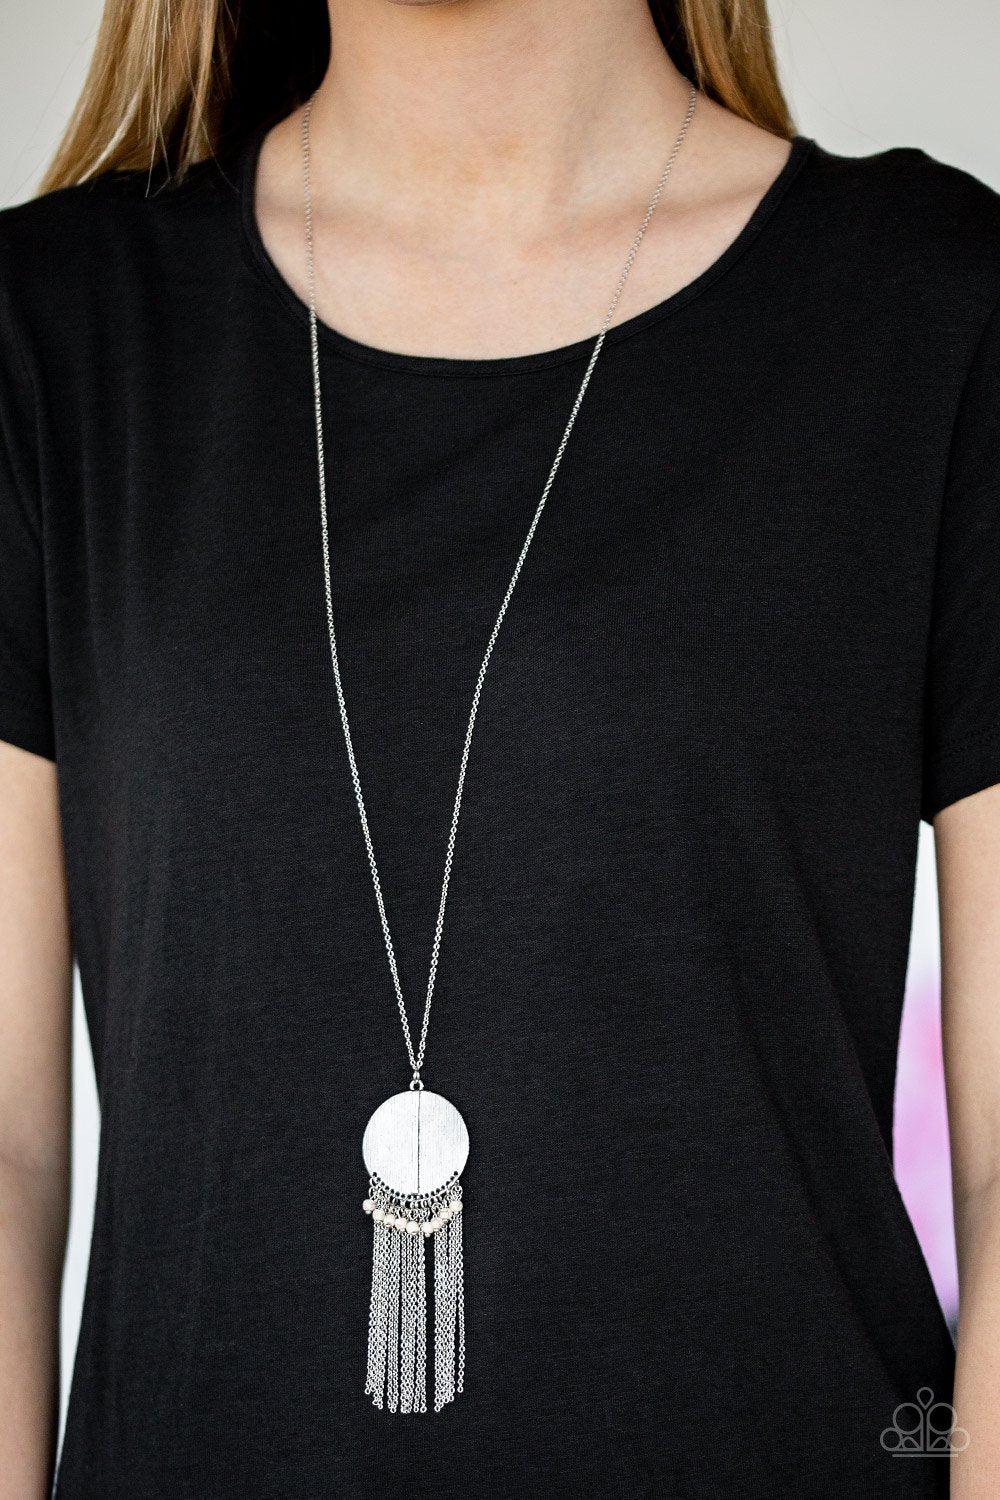 Get a ROAM White Necklace - Paparazzi Accessories - lightbox -CarasShop.com - $5 Jewelry by Cara Jewels